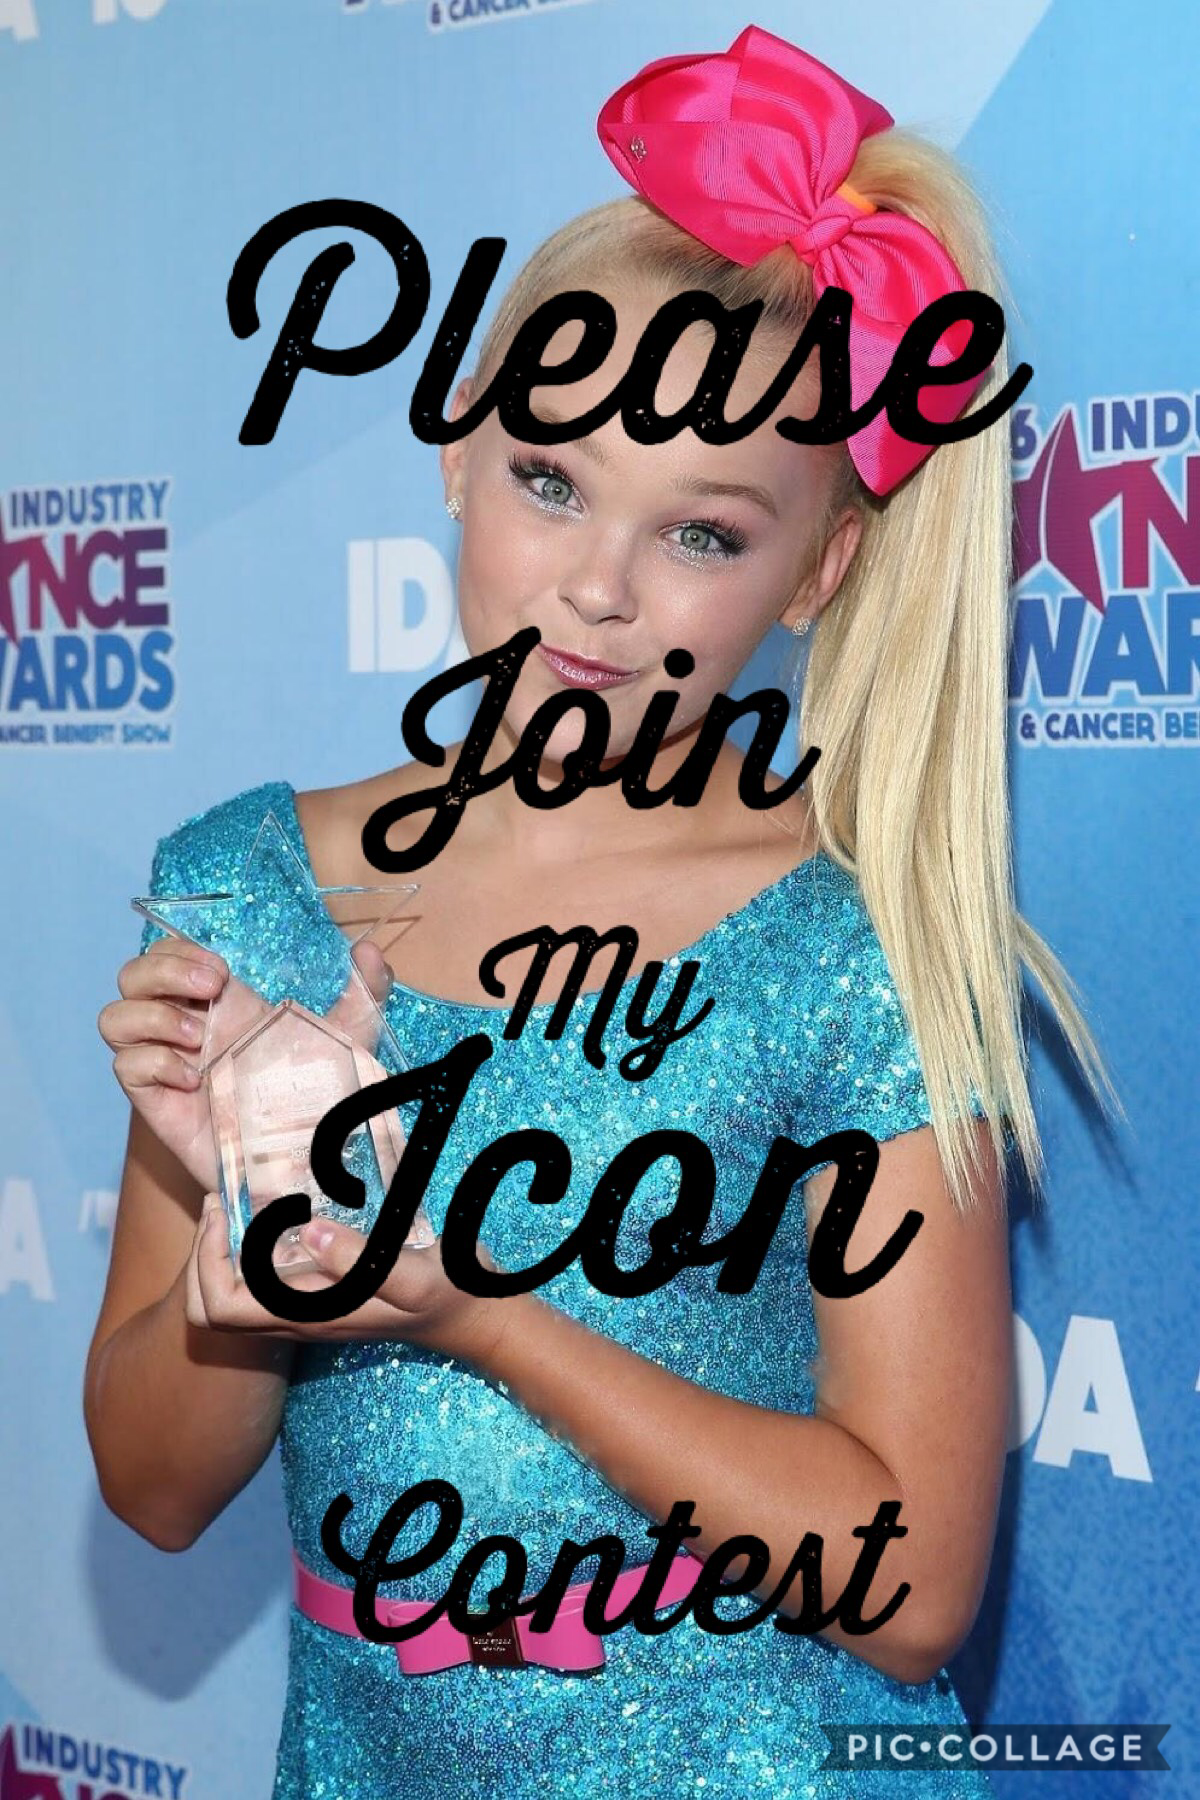 Please join my icon contest the end date is August 6th 